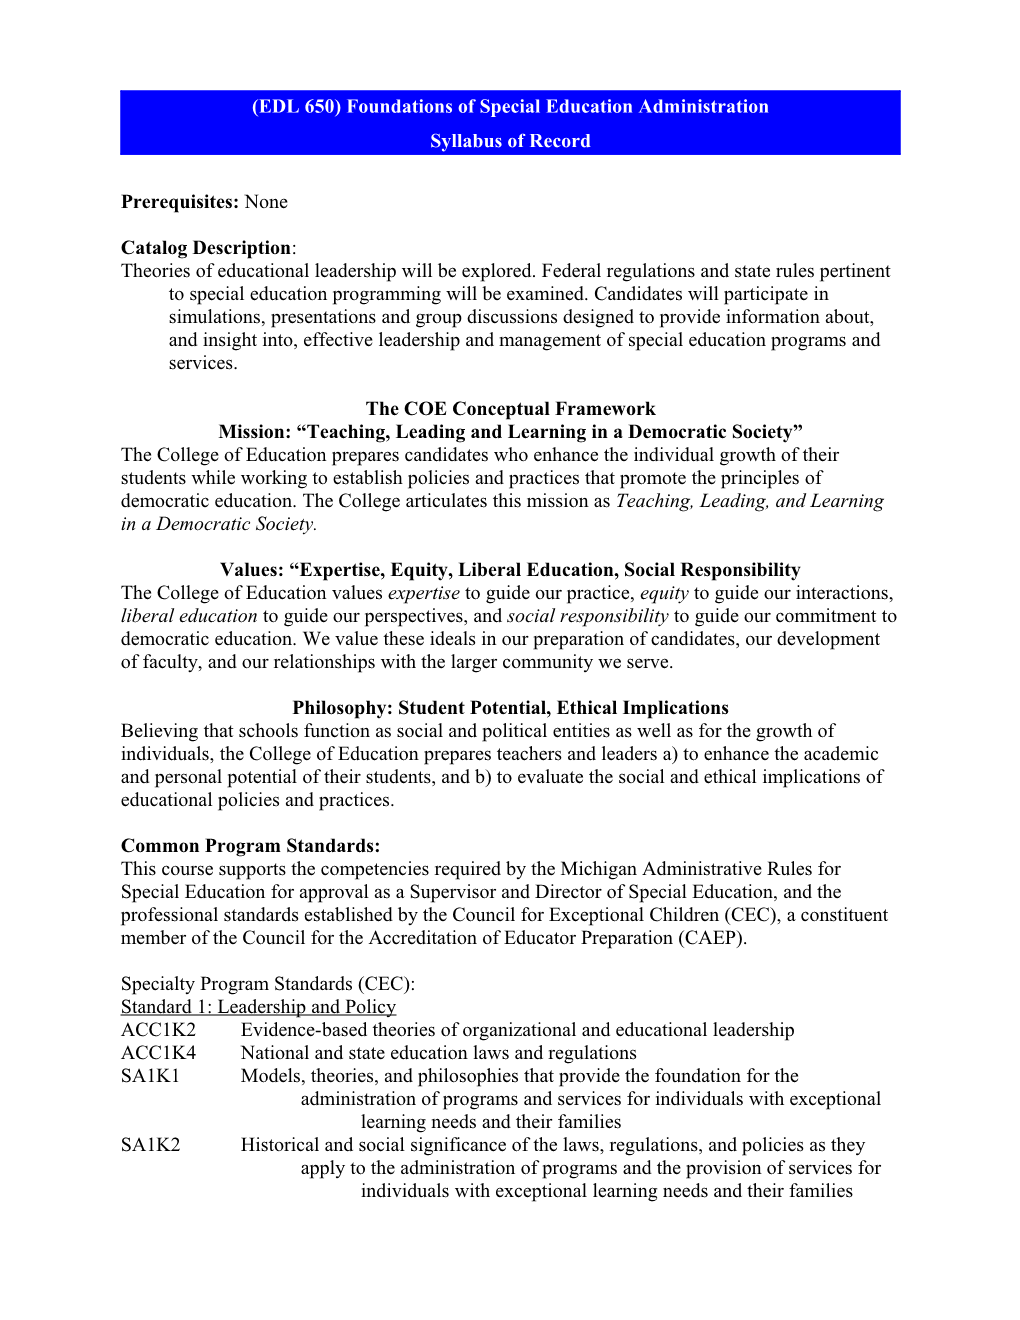 EDS 665 Syllabus of Record: Foundations of Special Education Administration